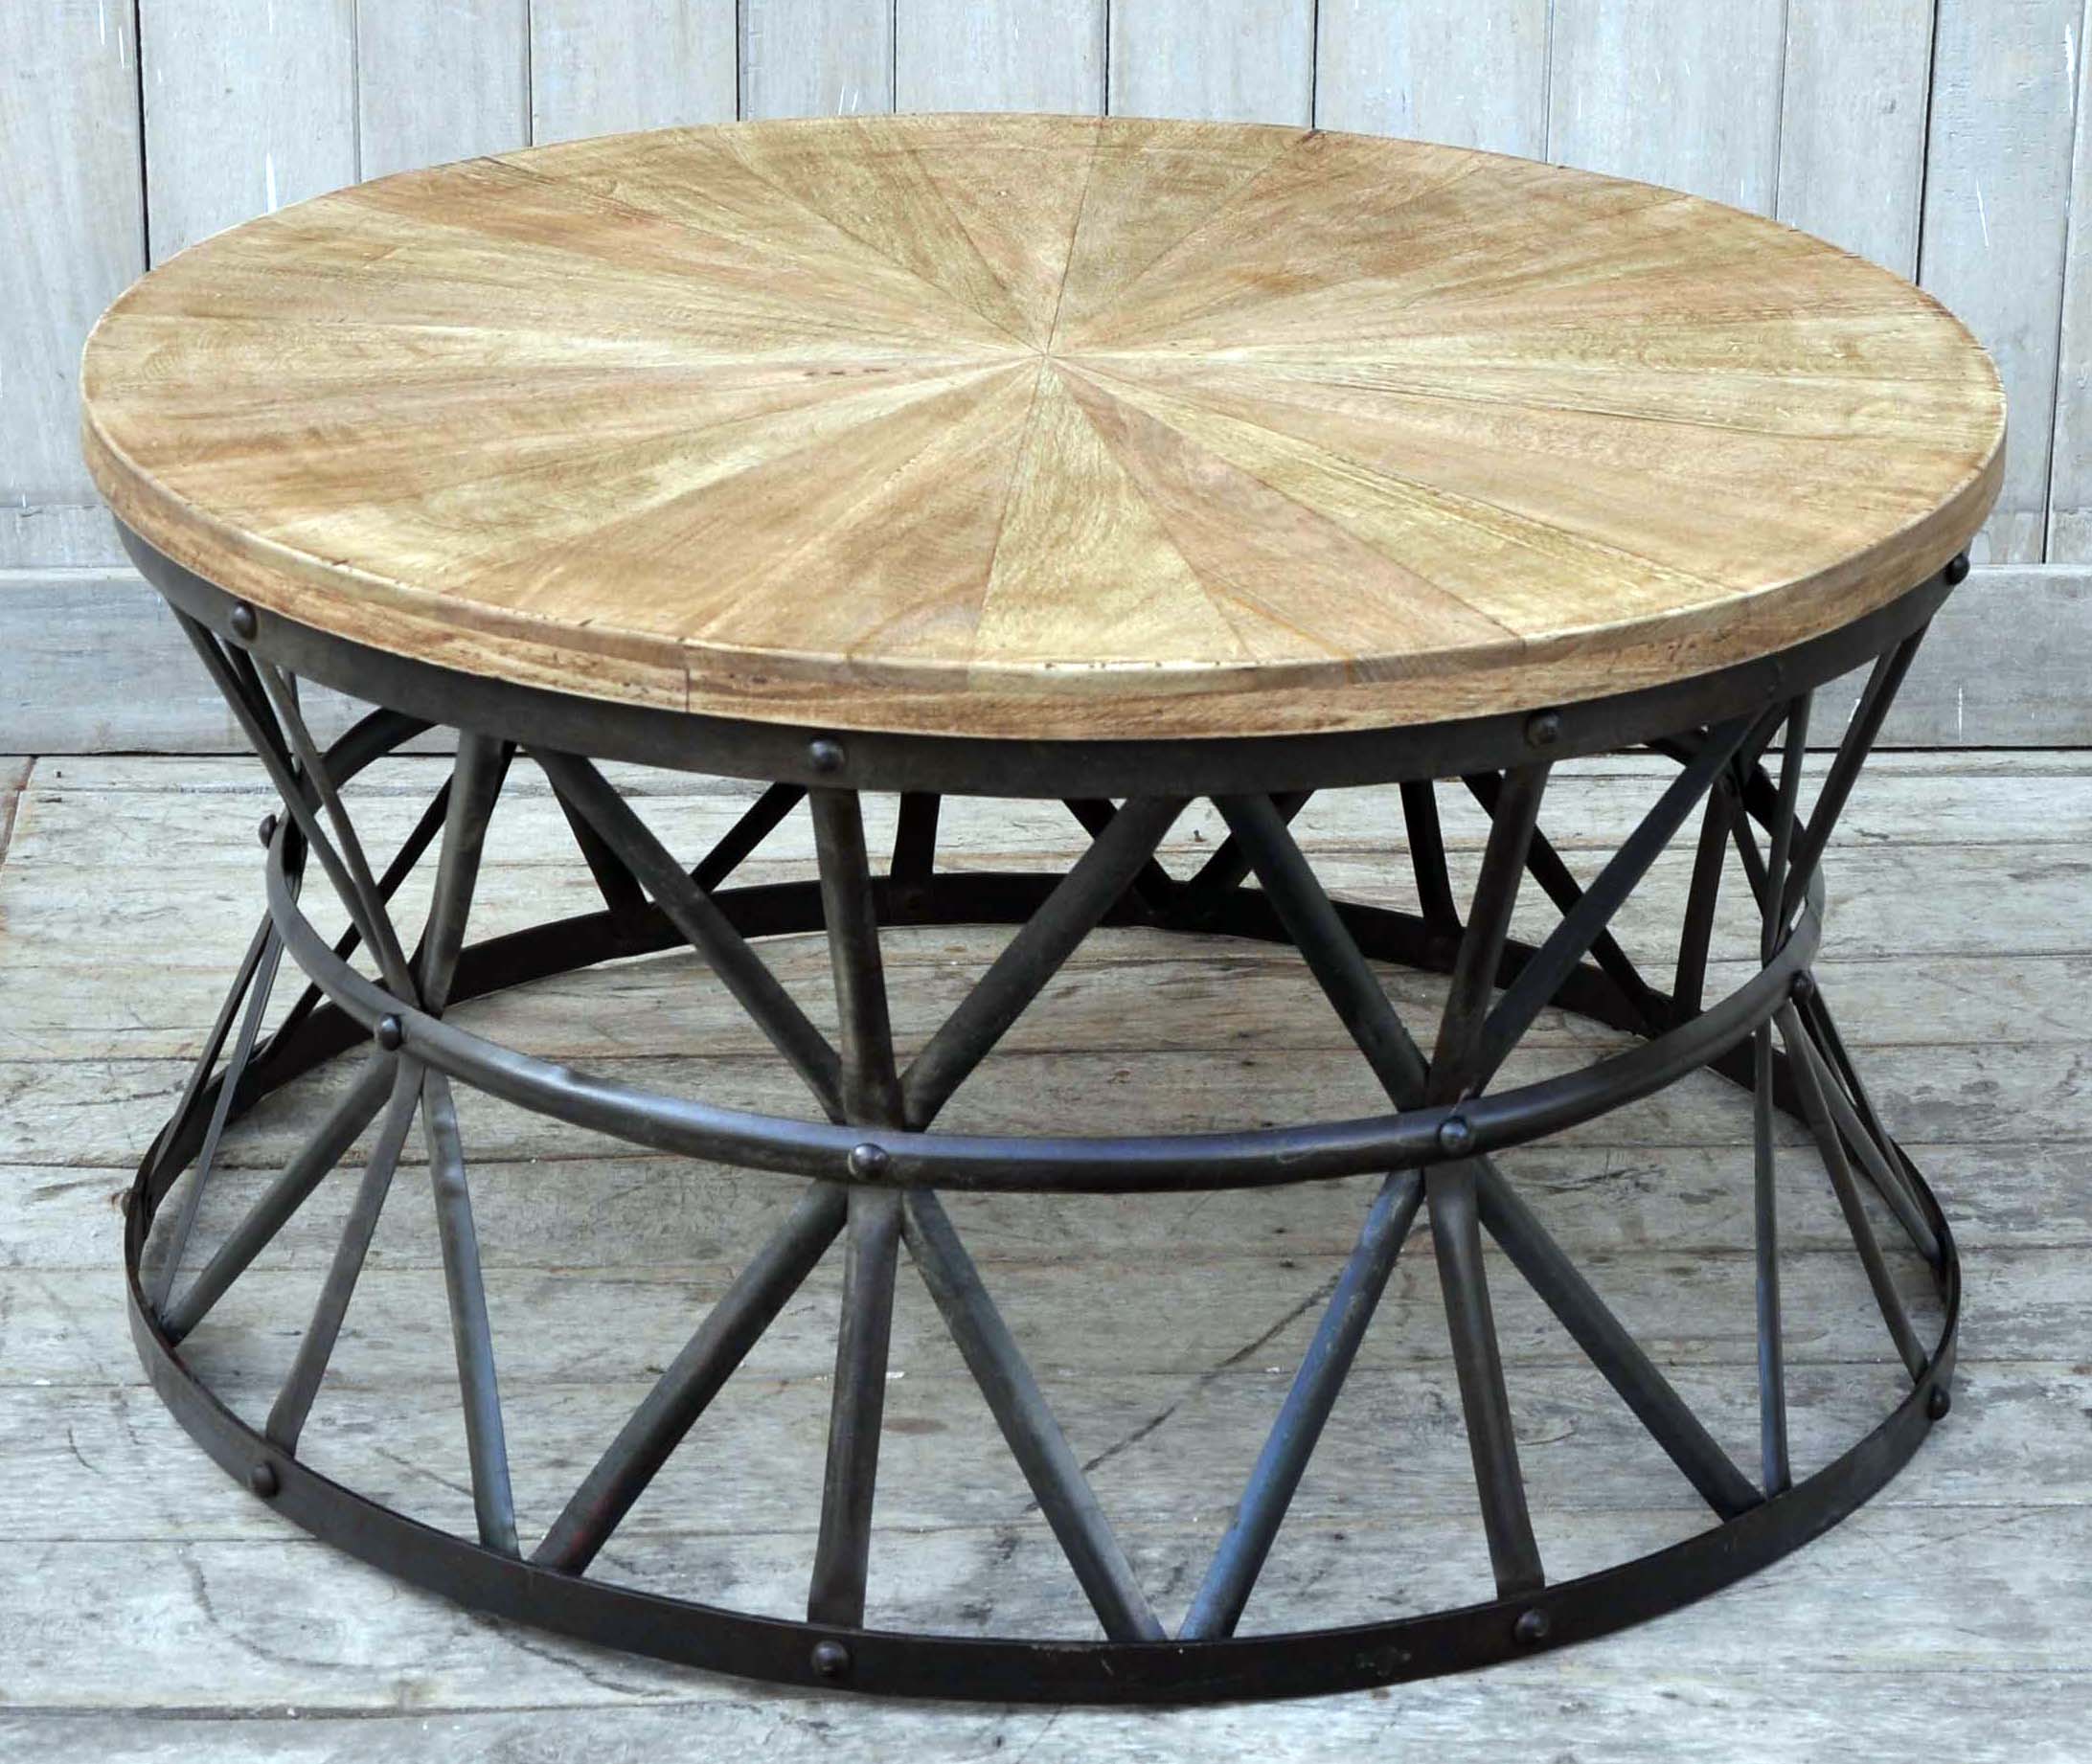 Round Handmade Wrought Iron Wedge Coffee Table | Buy Coffee Tables - 208003